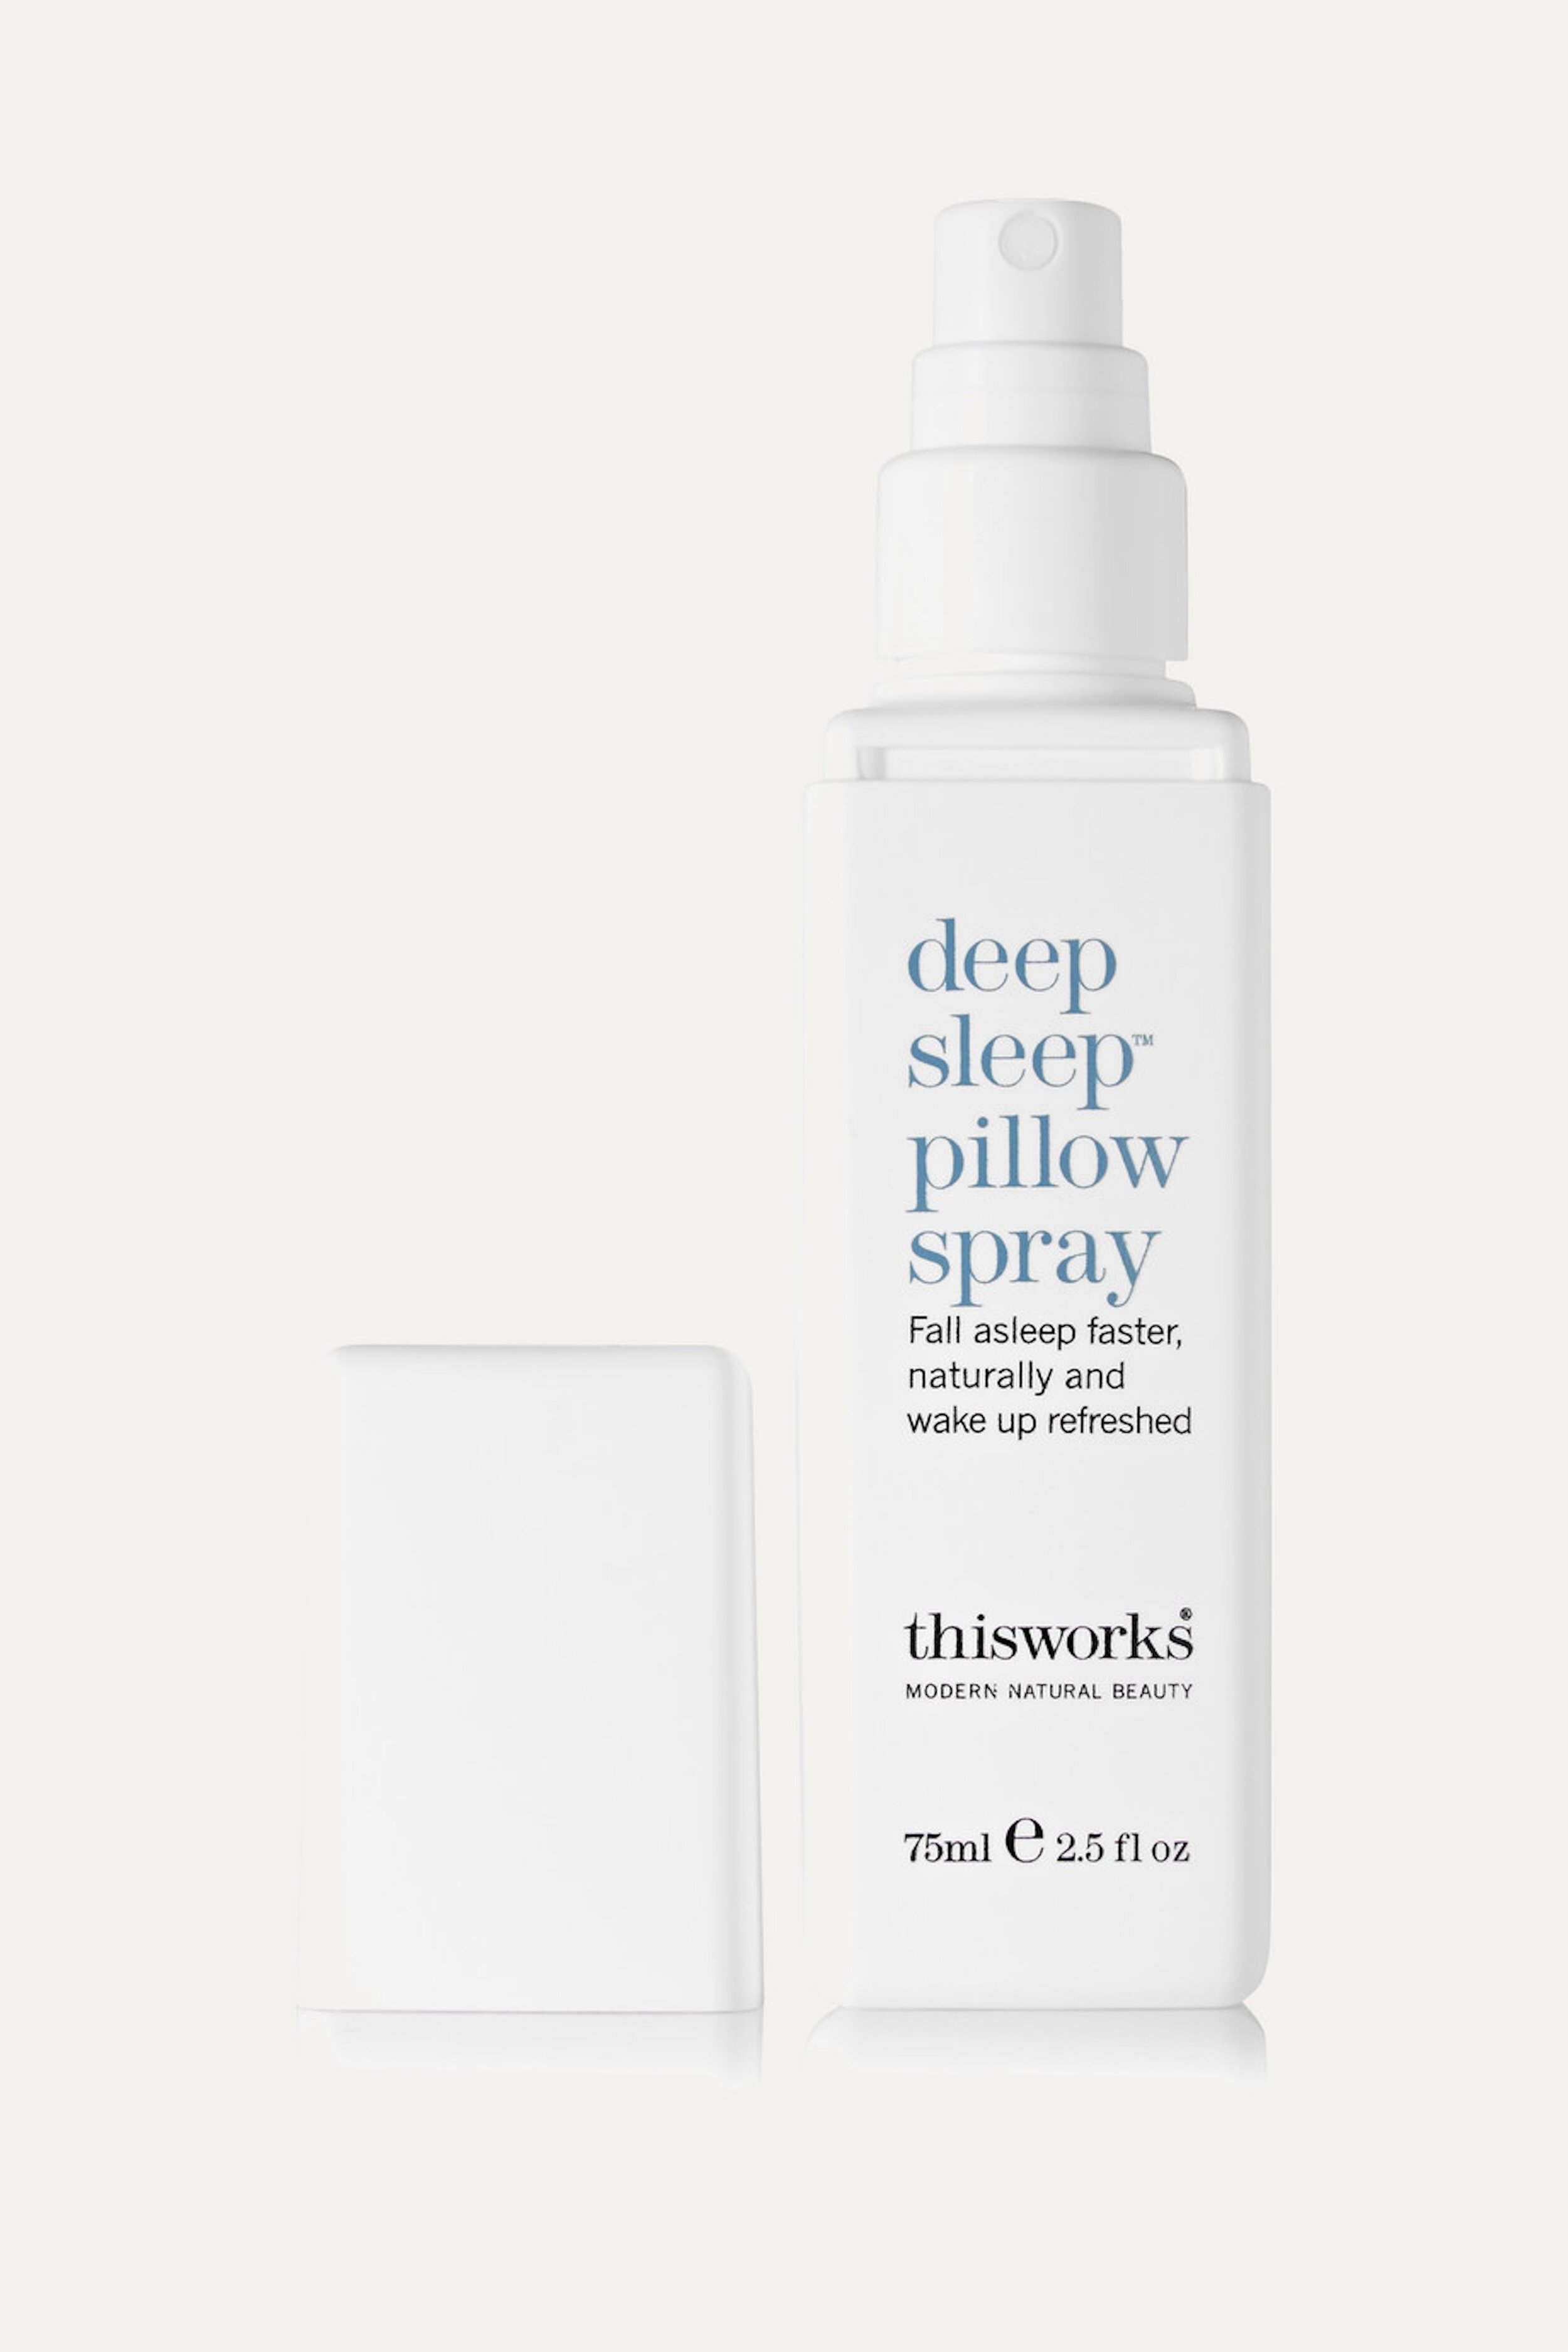 Deep Sleep Pillow Spray by This Works